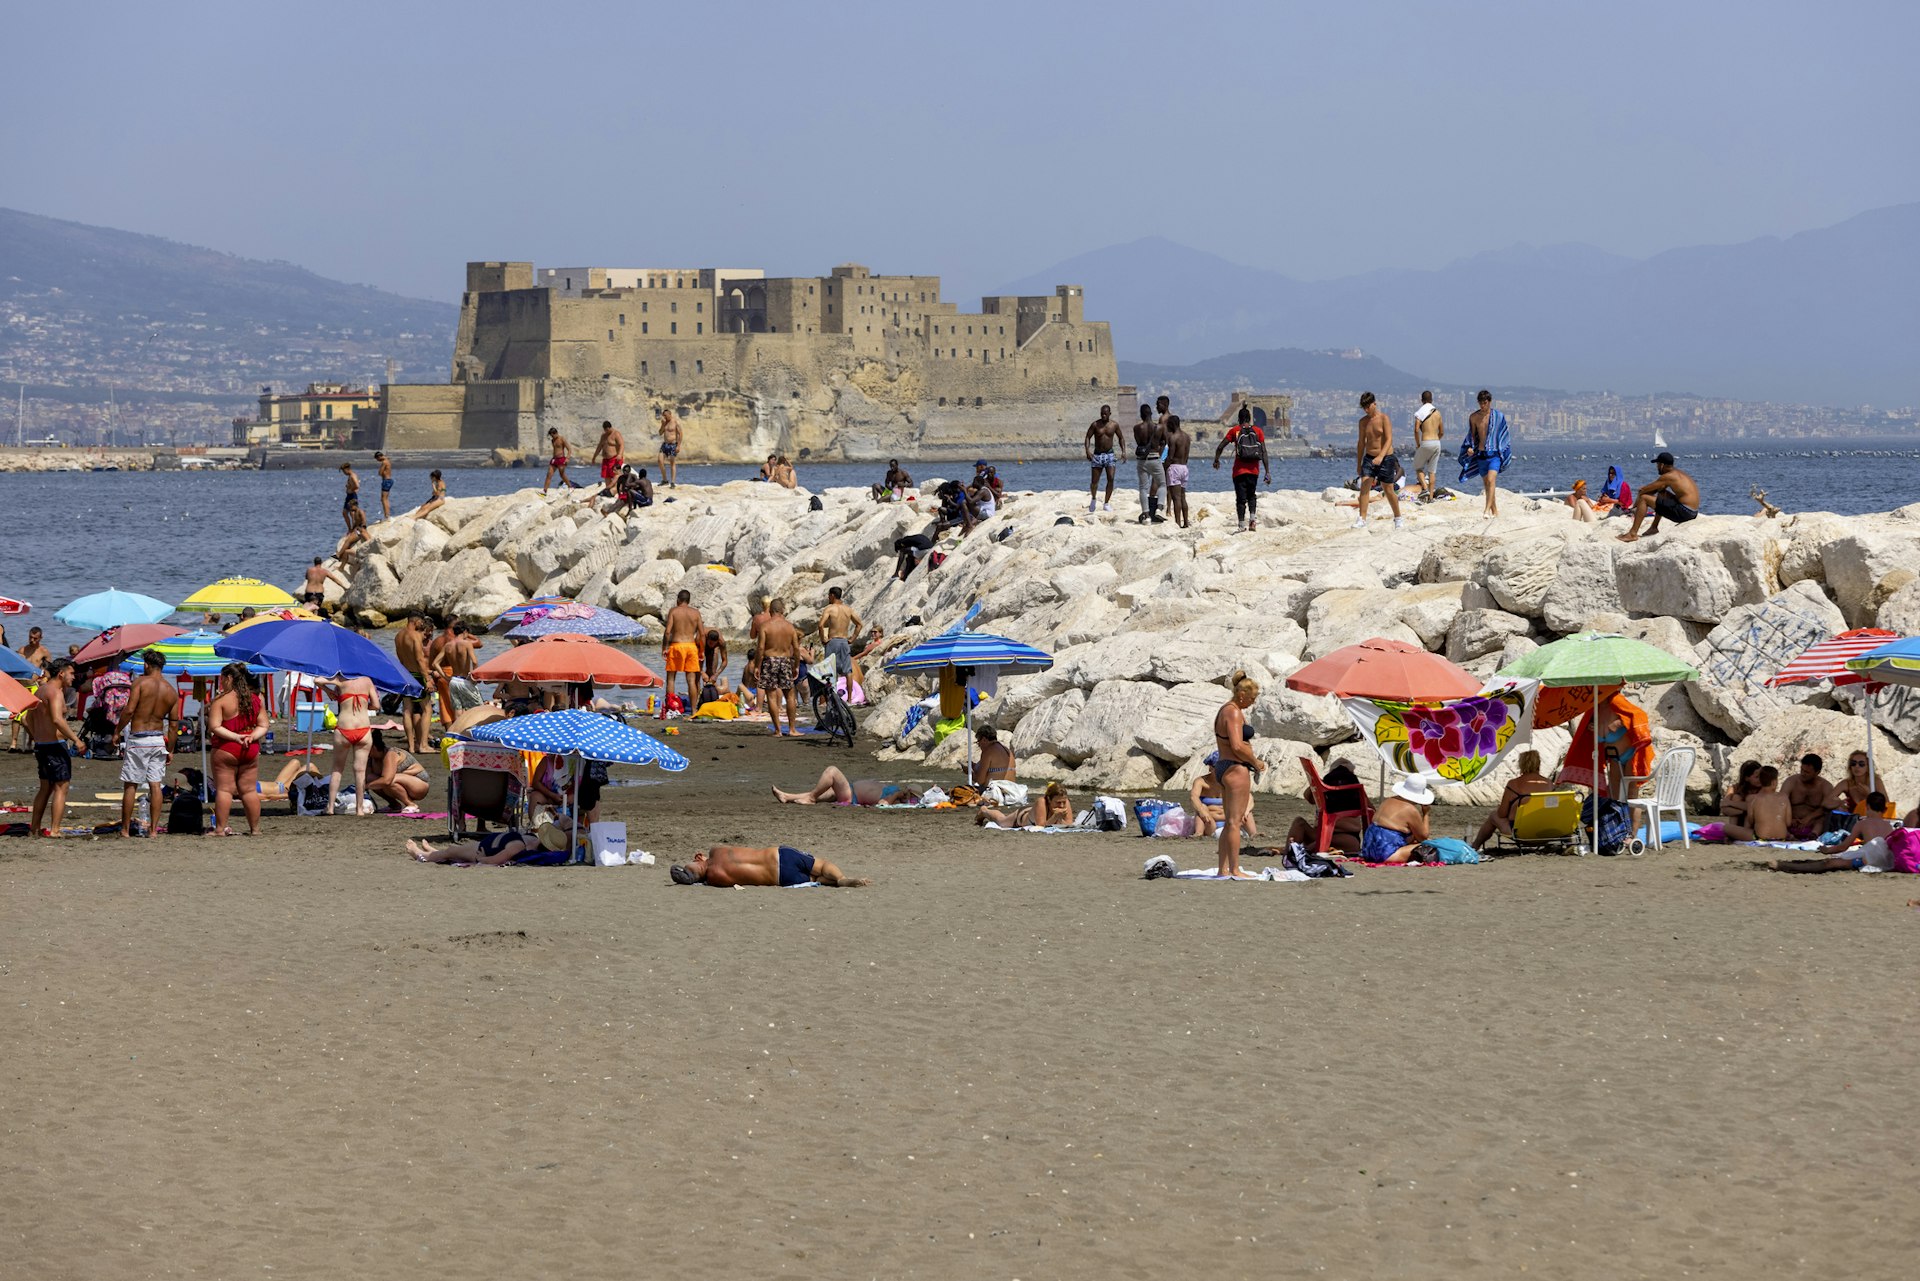 People relaxing on a beach, with colorful umbrellas and a large fortress-like building in the background